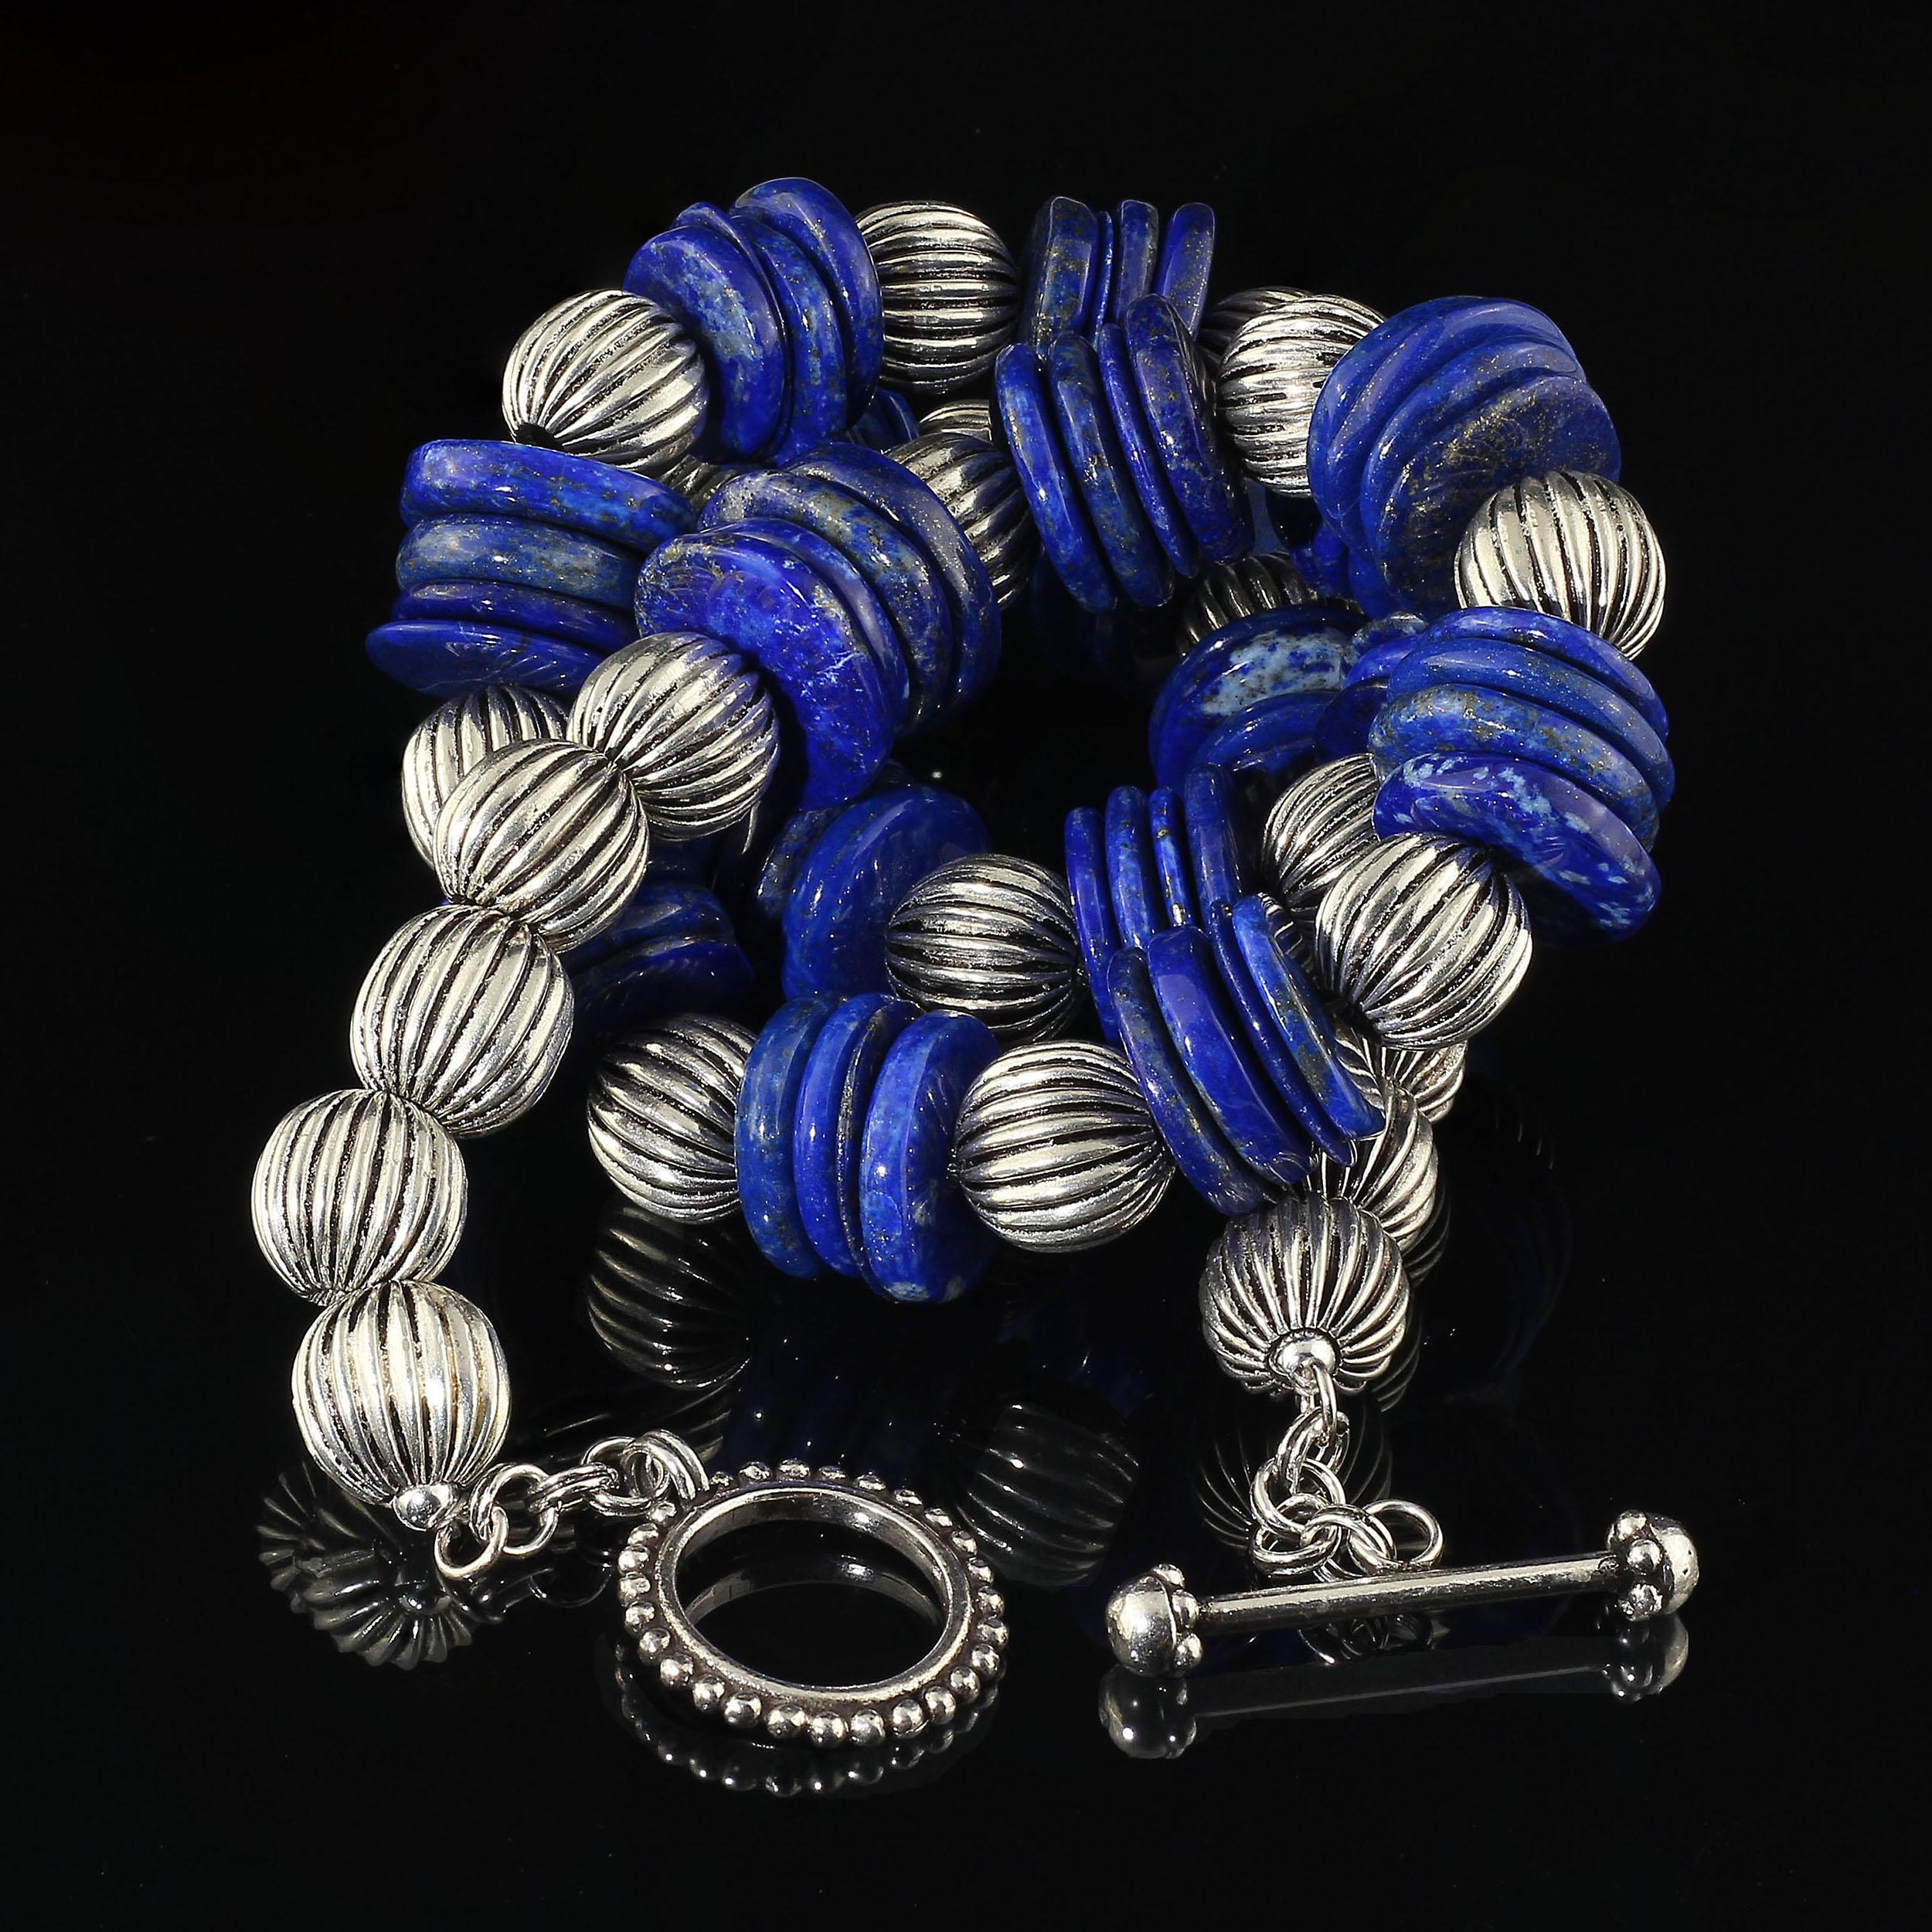 Women's or Men's AJD Necklace of Blue Lapis Lazuli Slices with Ribbed Silver Accents